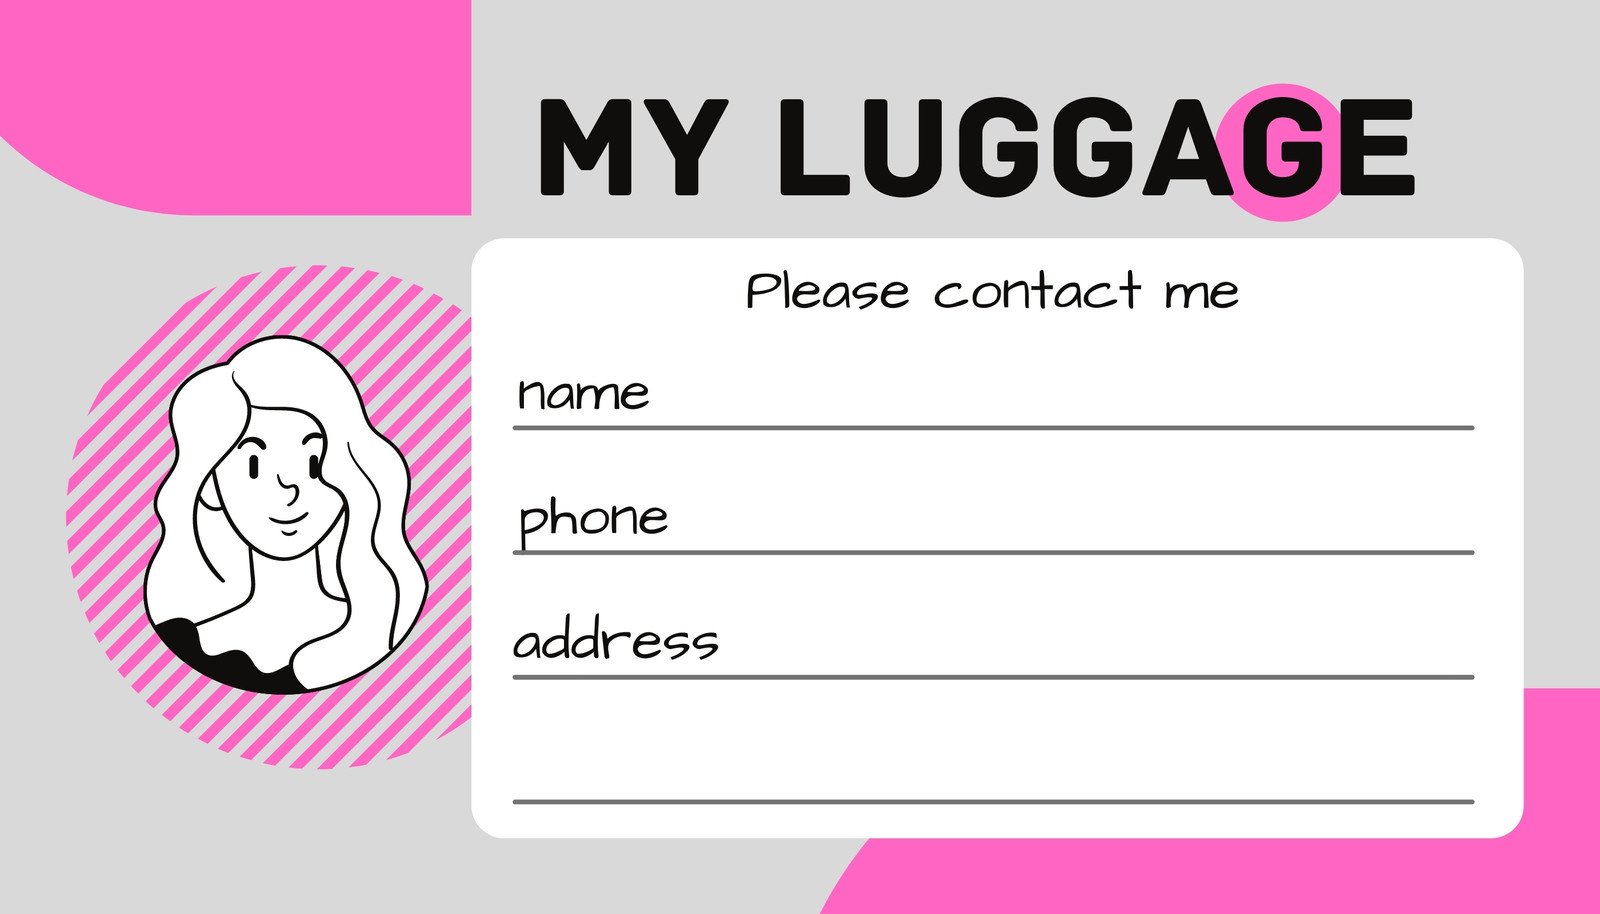 50 Personalized Luggage Tag Templates - TemplateArchive